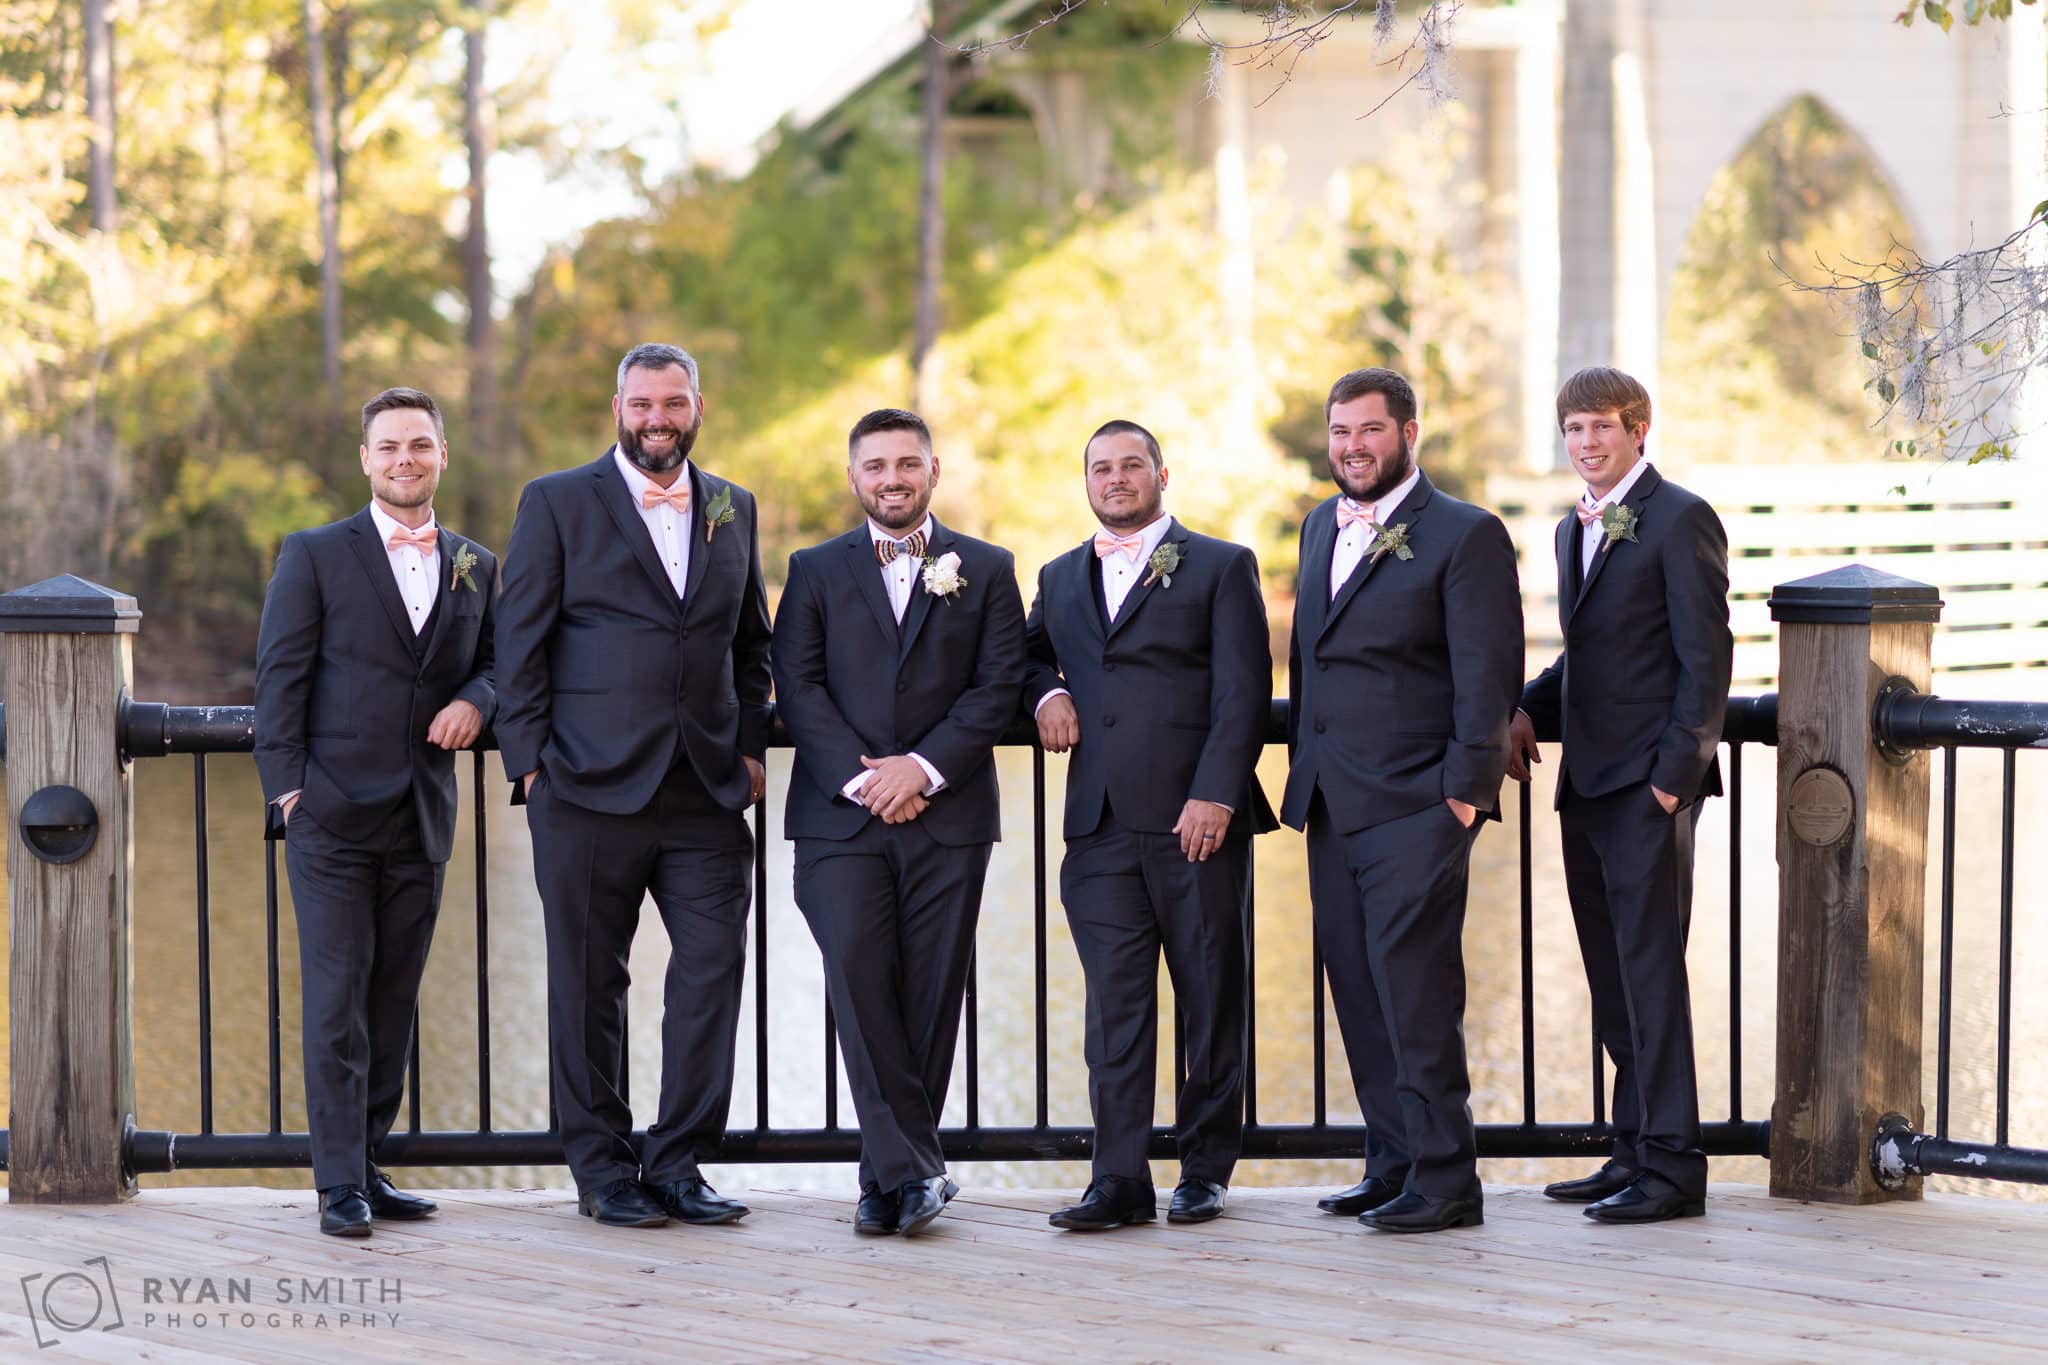 Casual portrait of groomsmen by the river - Conway River Walk